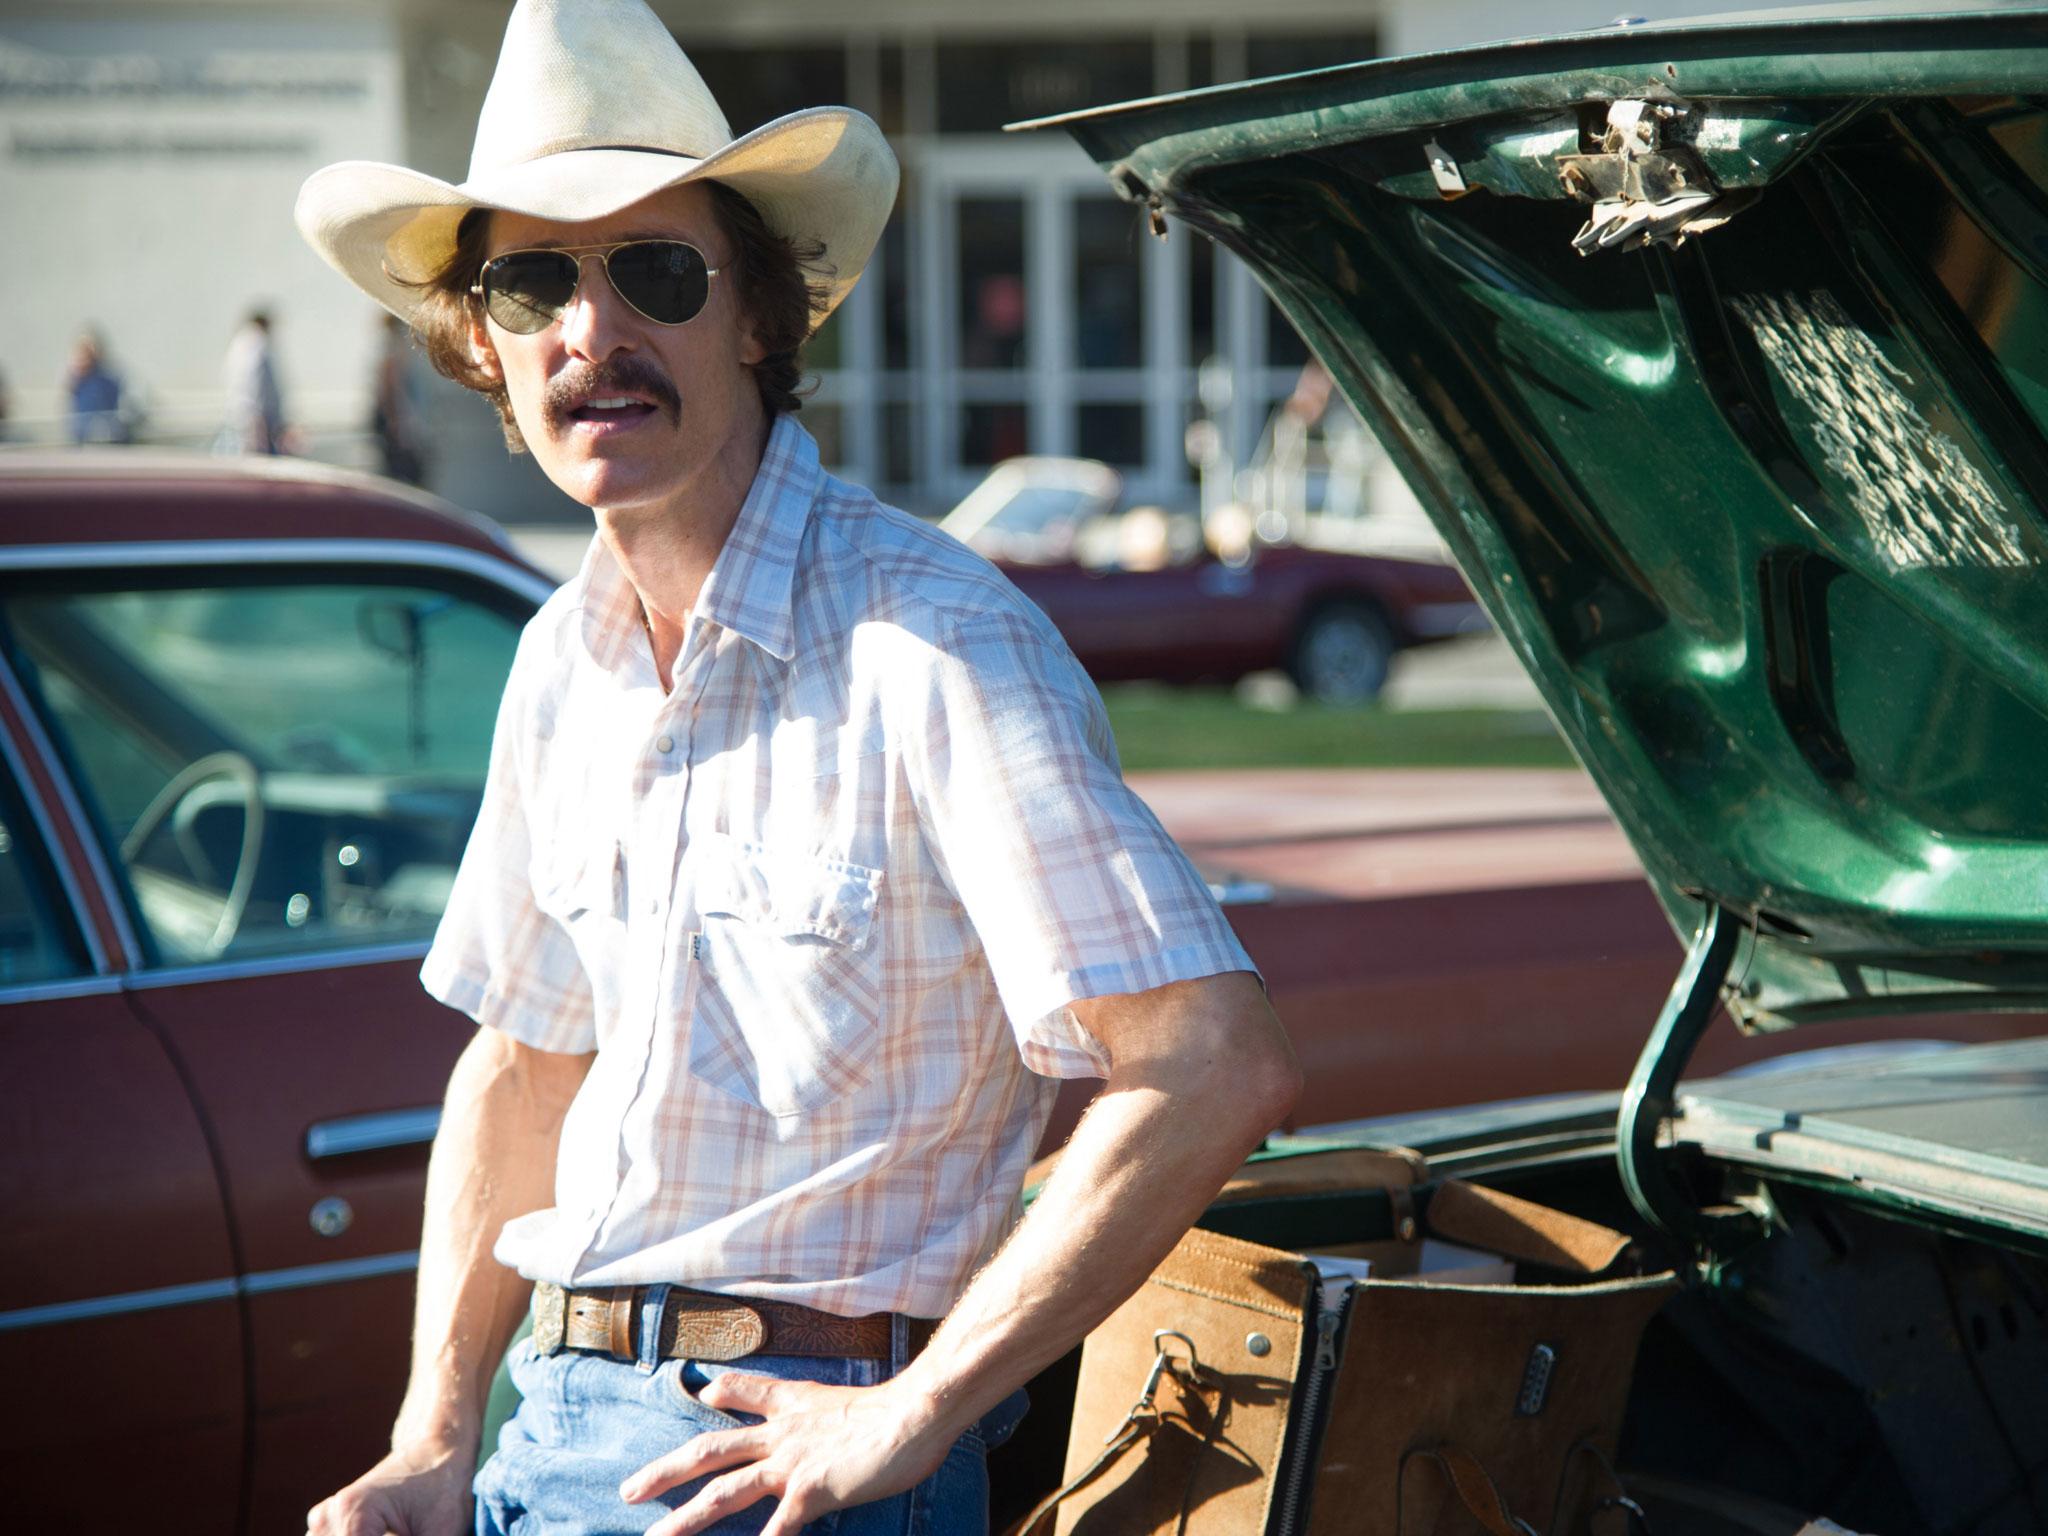 Matthew McConaughey committed to a strict diet ahead of playing Ron Woodroof in Dallas Buyers Club